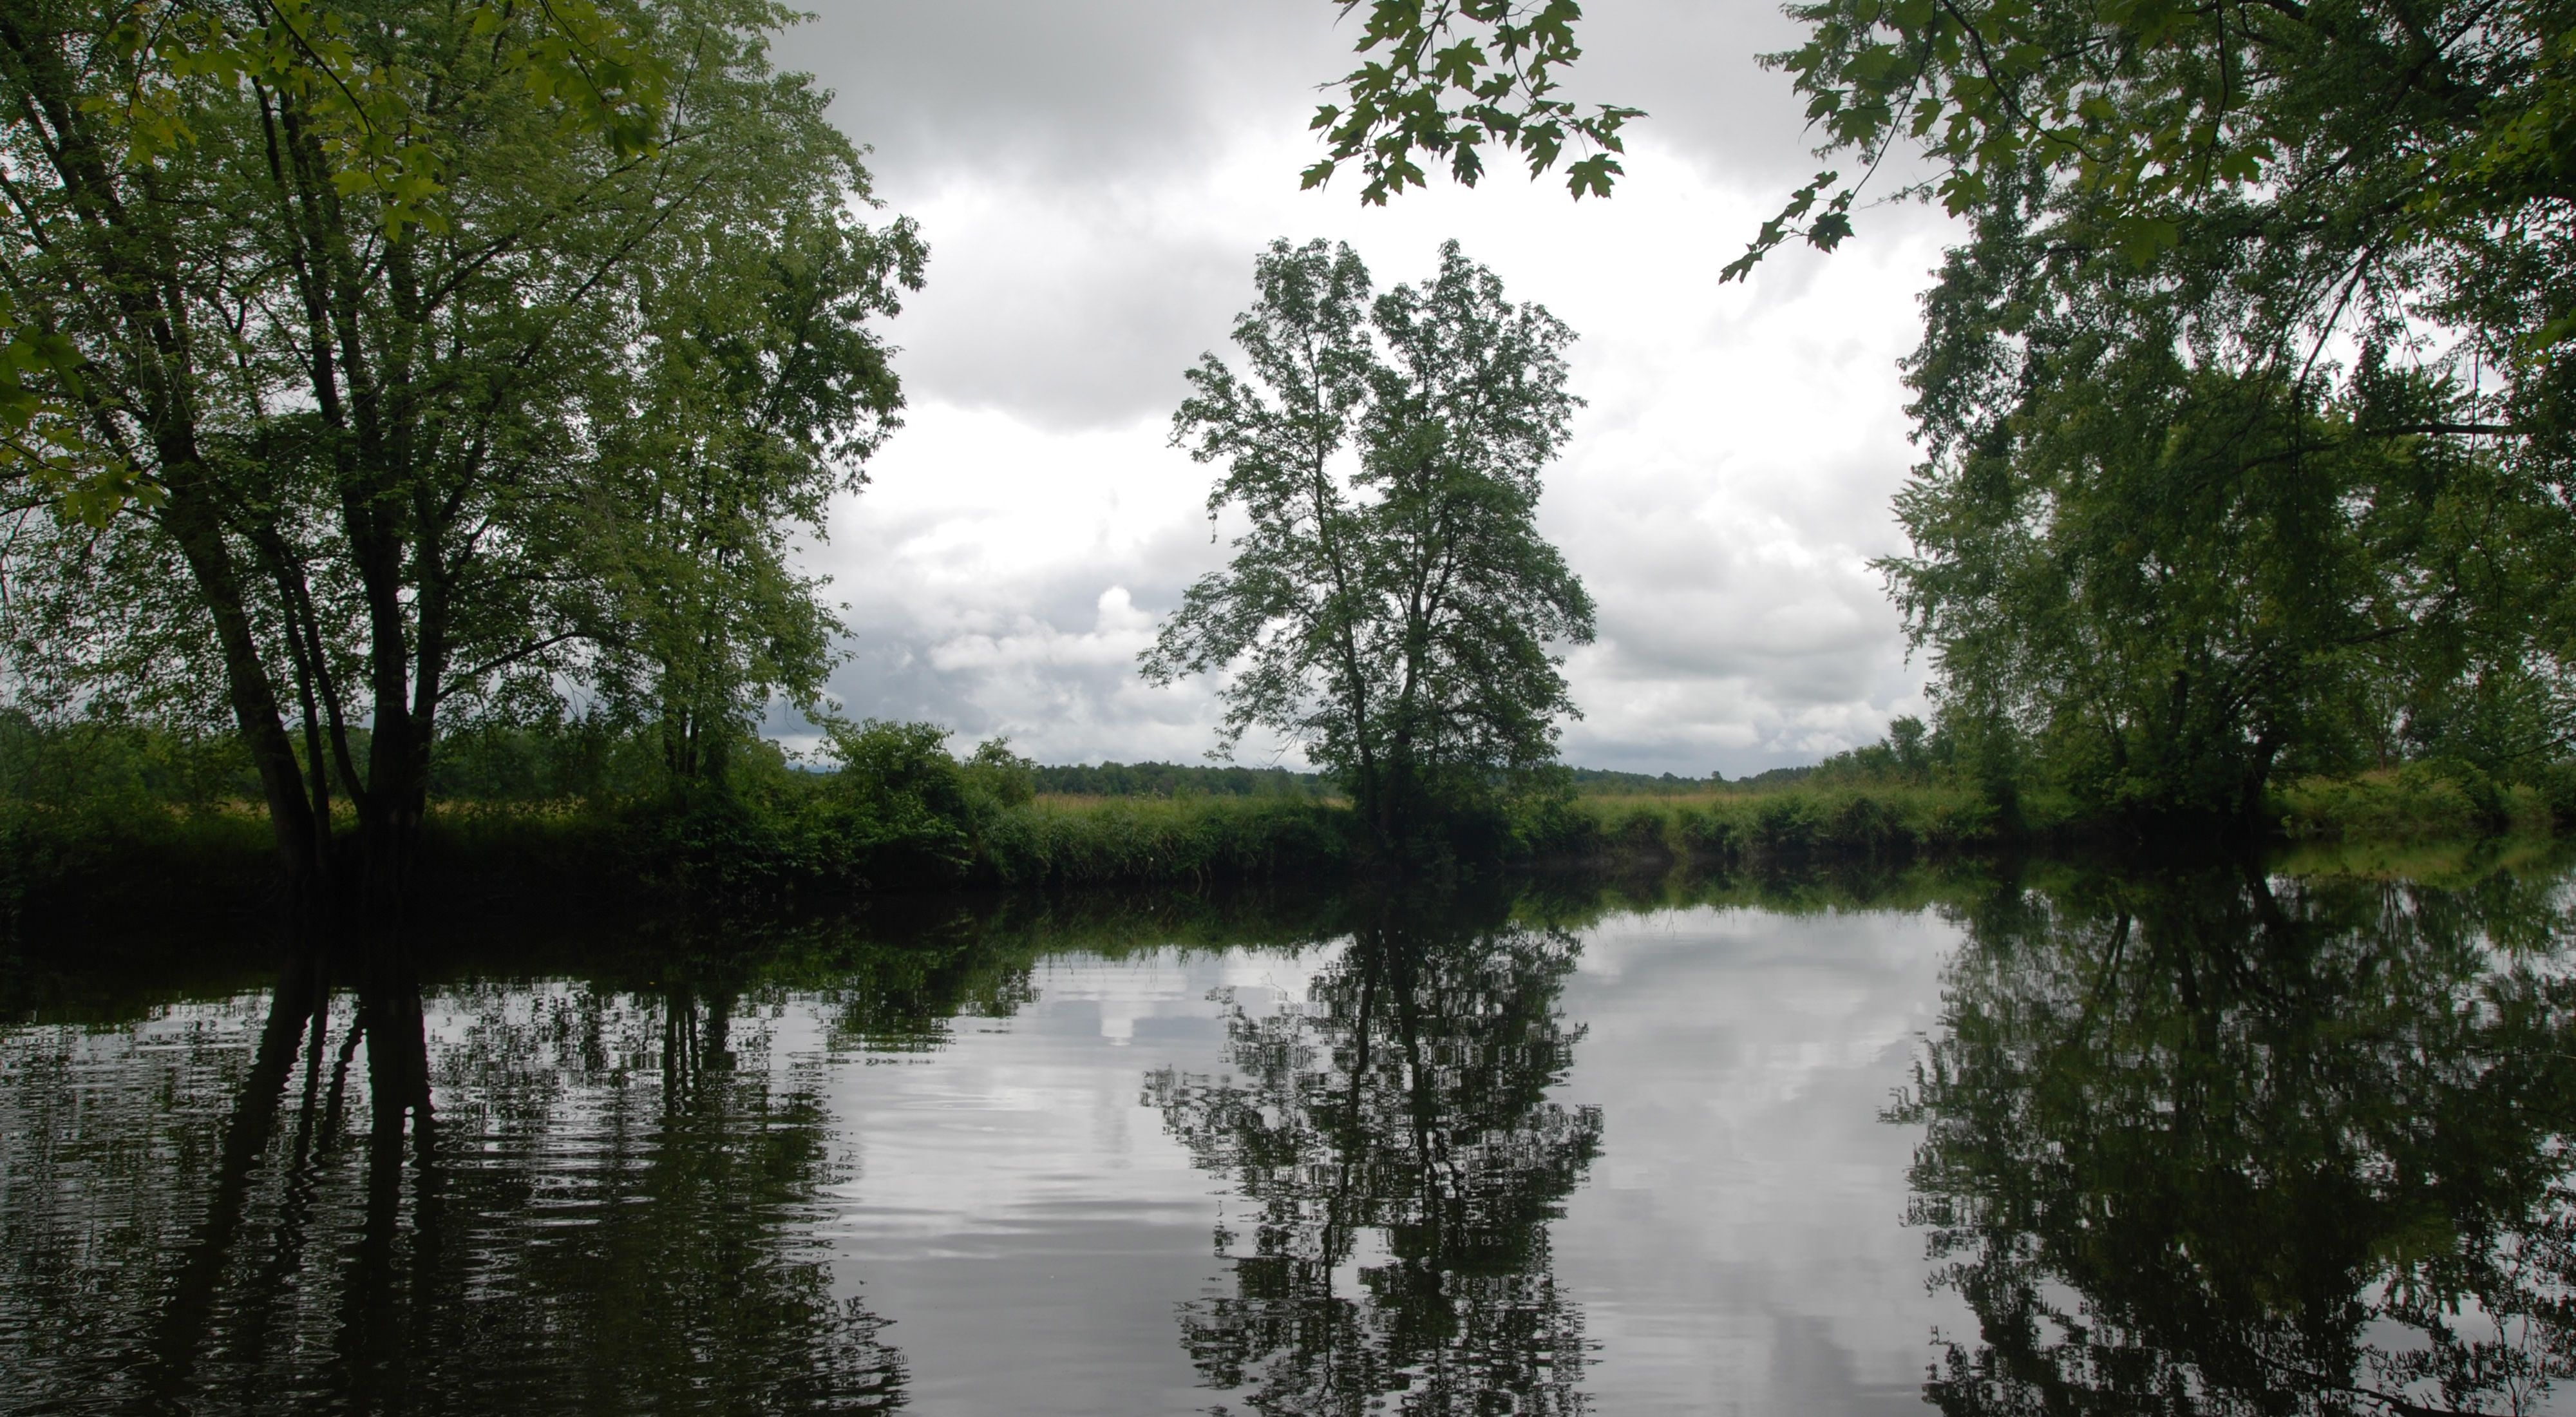 Bond Island in the Otter Creek Swamp complex was a candidate for development until the Conservancy and the Vermont Housing and Conservation Board stepped in to protect it.